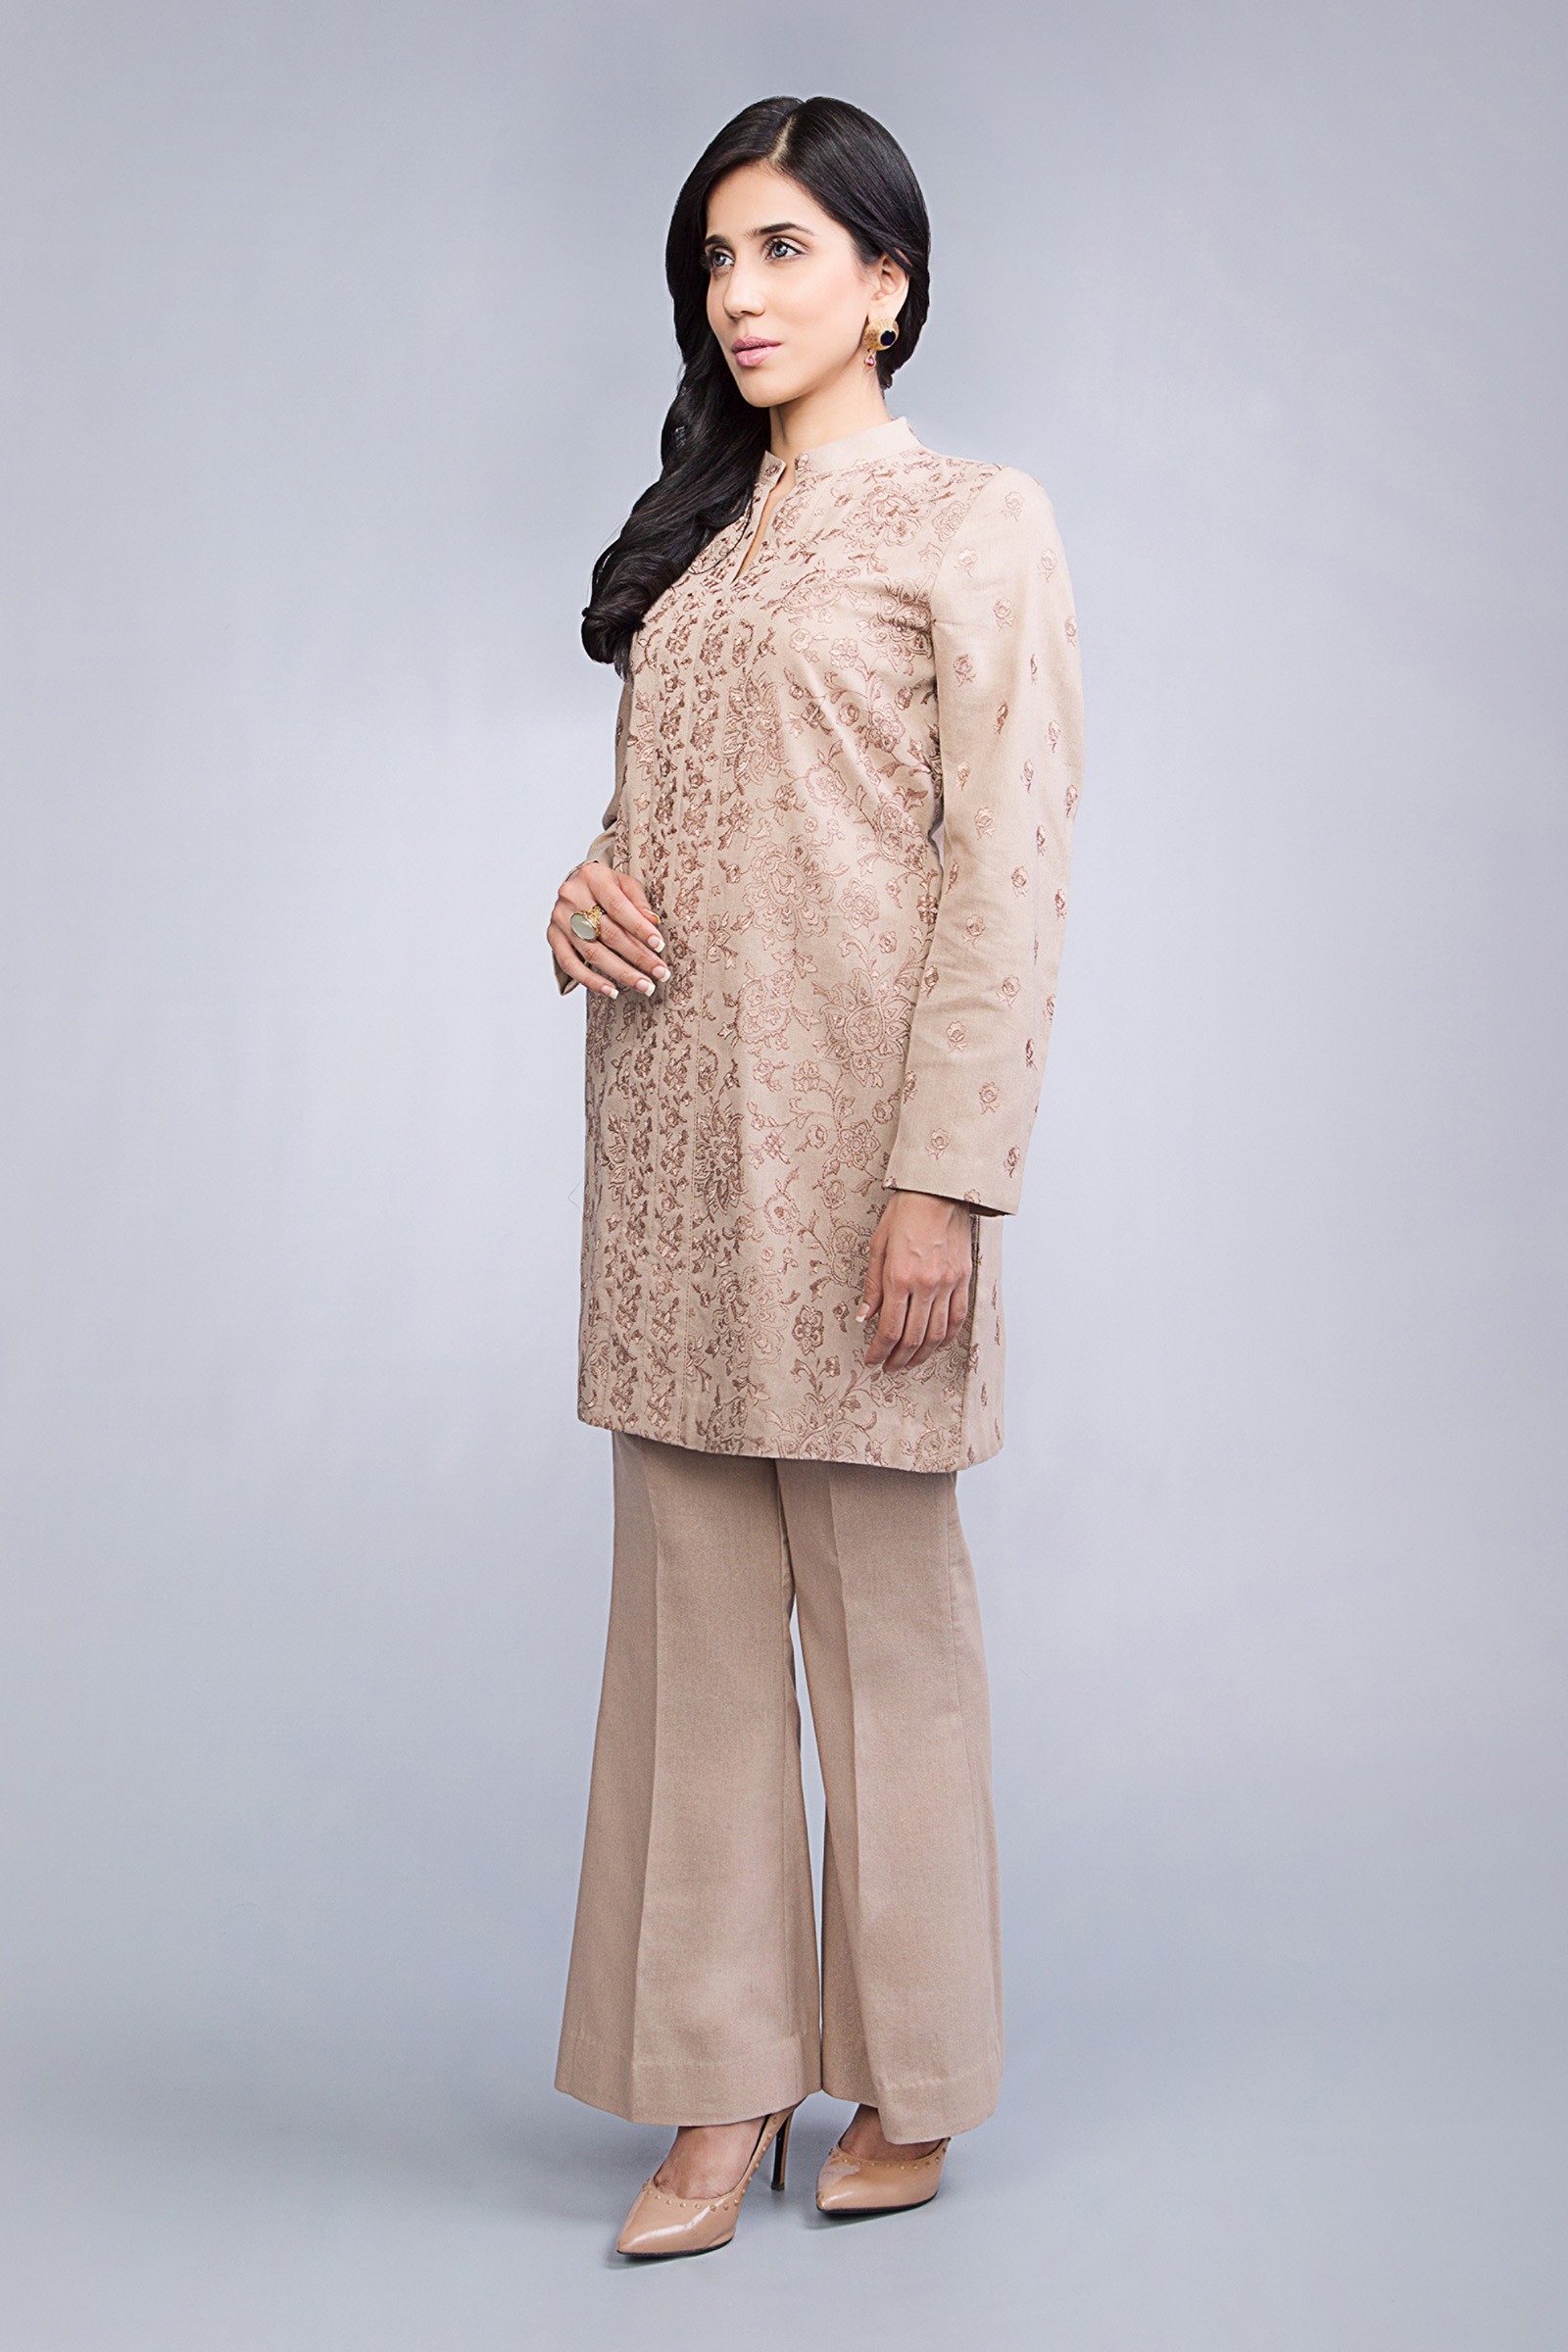 Persian almond 3 piece stitched dress by Bareeze pret wear collection 2019